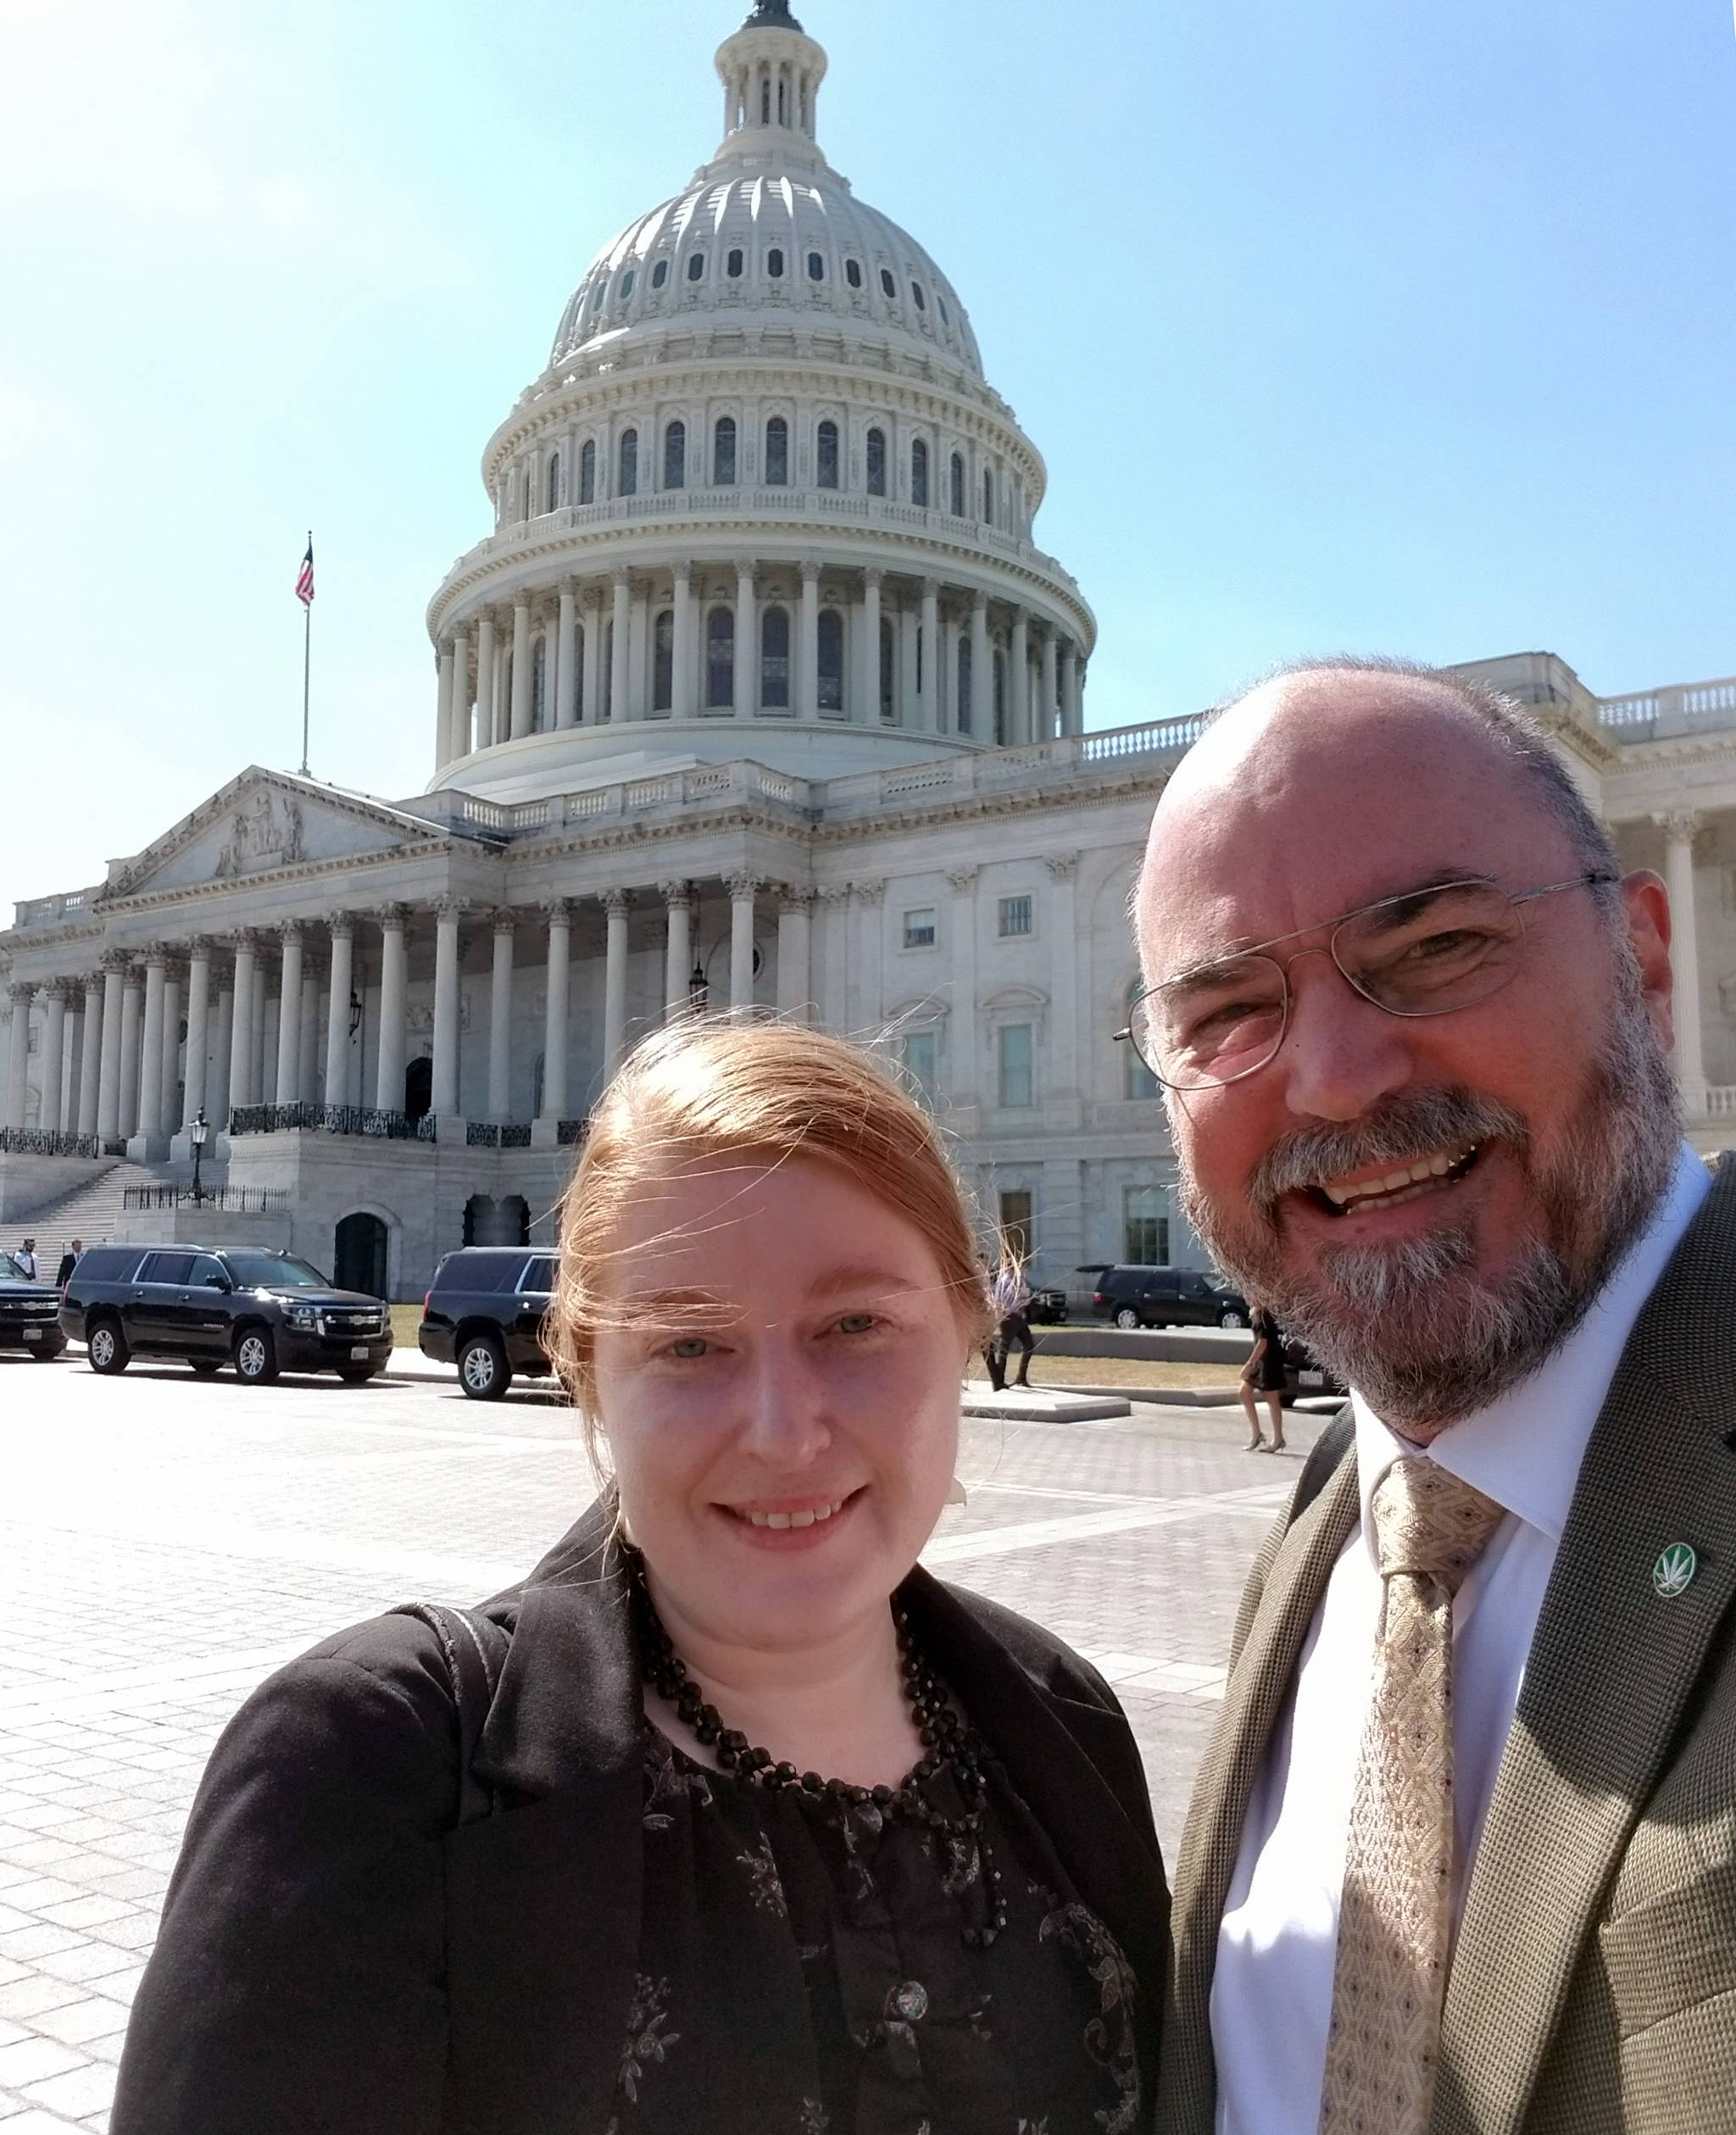 Courtesy Photo | Cary Carrigan                                Alaska Marijuana Industry Association President Lacy Wilcox and AMIA Executive Director Cary Carrigan stand in front of the Capitol during a visit to Washington, D.C. to advocate for legislation that could enable banks to work with marijuana businesses.